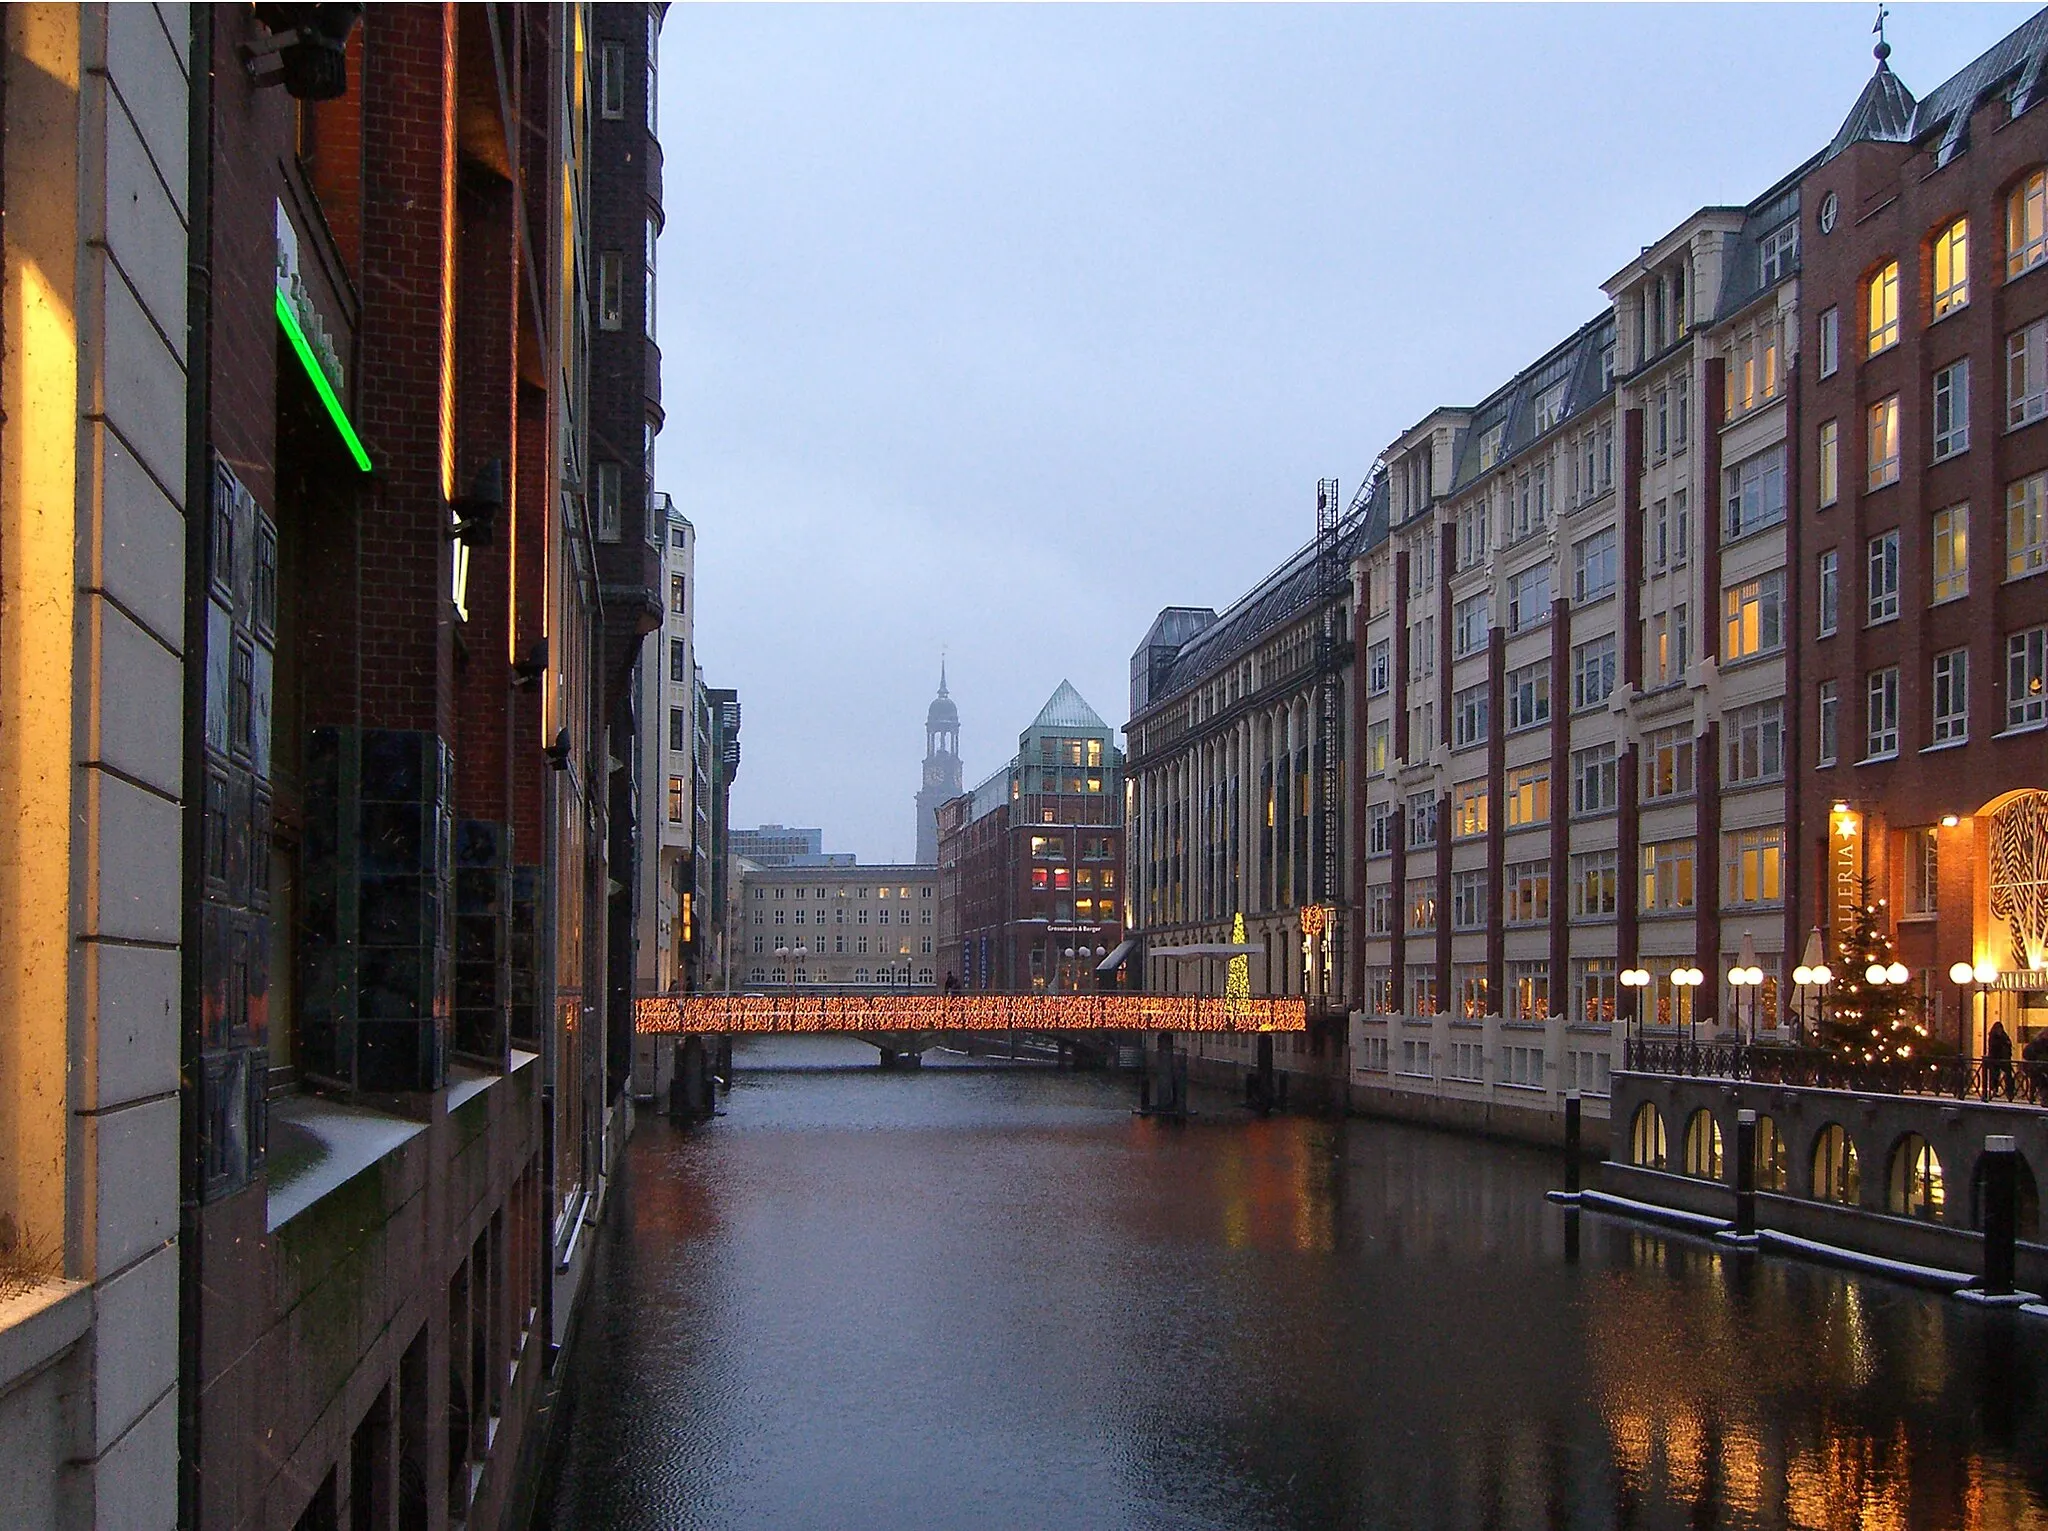 Photo showing: Dike "Bleichenfleet" in Hamburg. In the background the top of St. Michaelis.